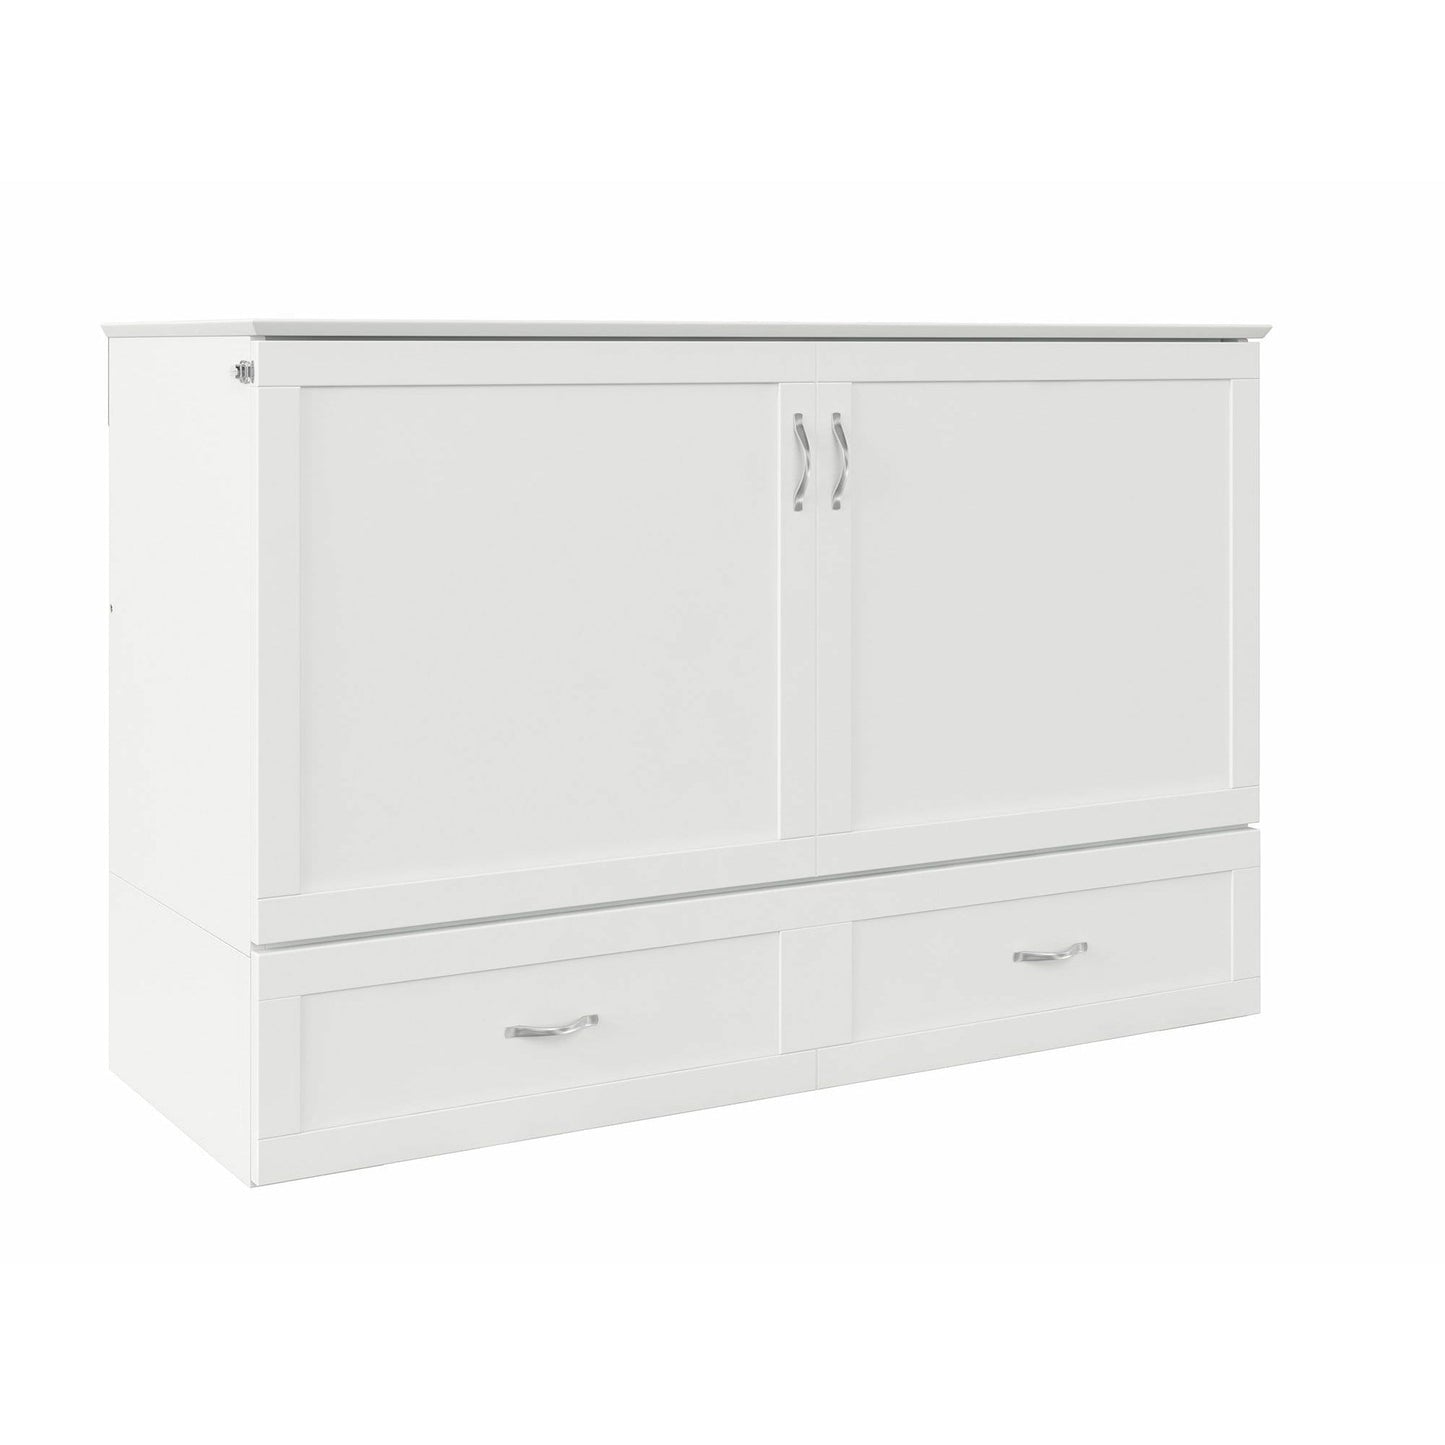 Atlantic Furniture Murphy Bed Chest White Hamilton Murphy Bed Chest Queen Grey with Charging Station